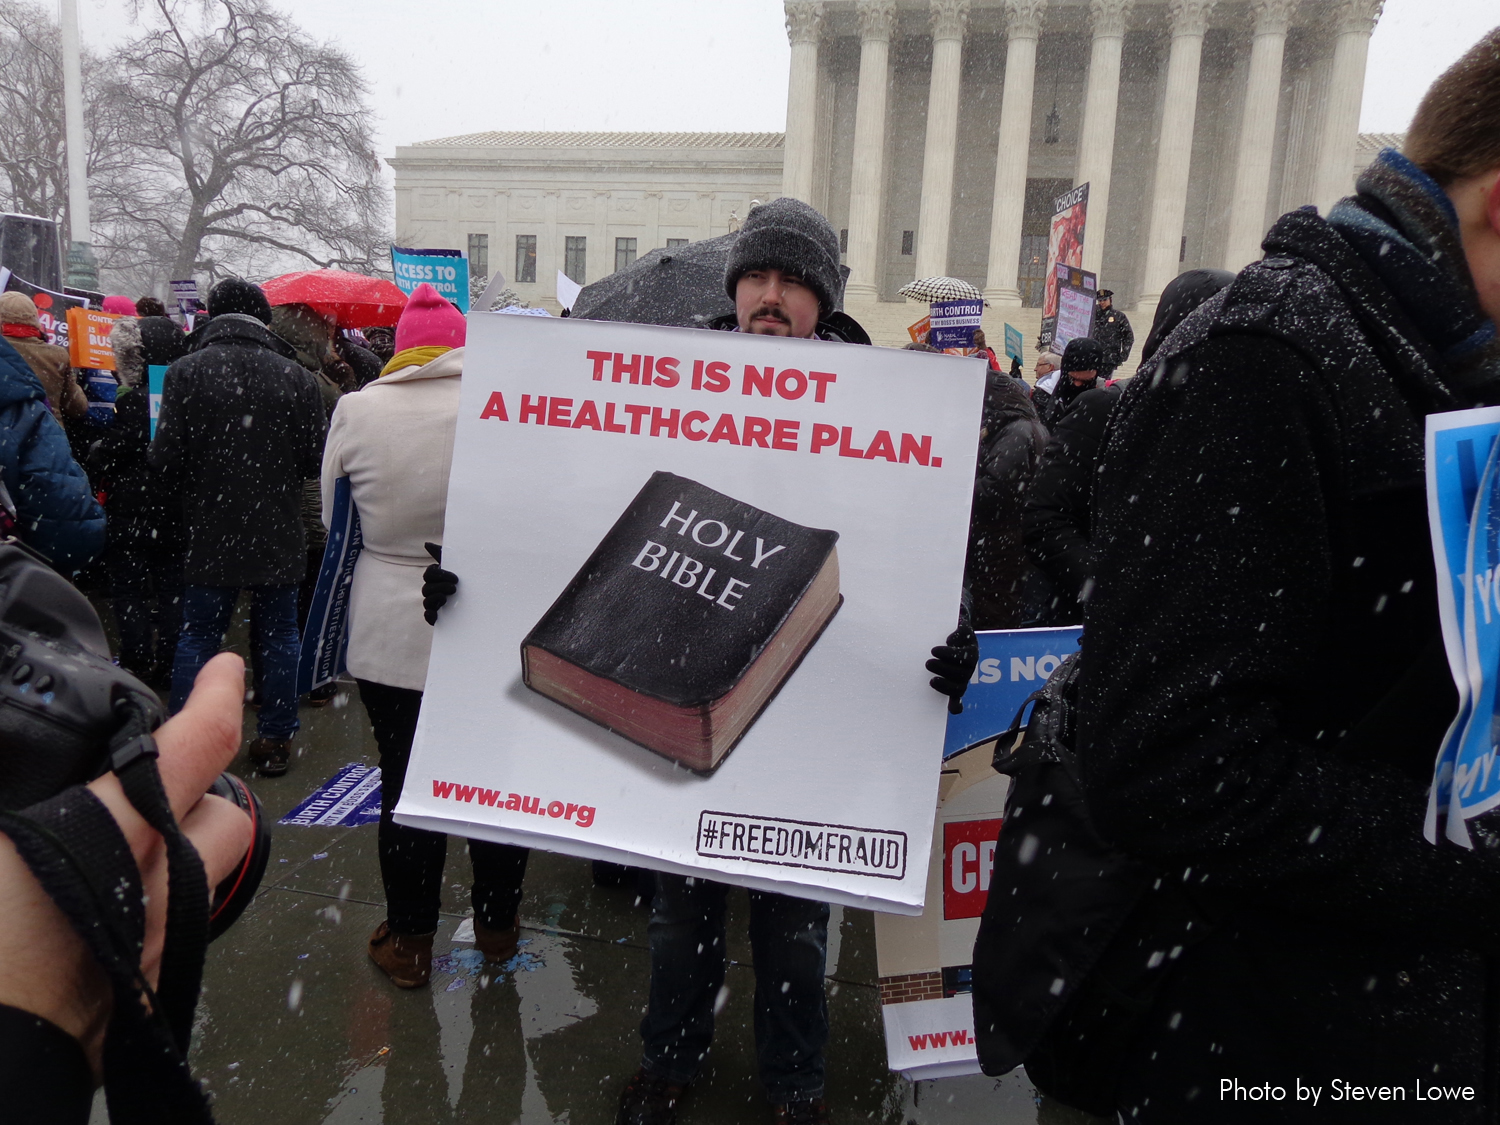 3/25/2014 - Rally at the US Supreme Court during Sebelius v. Hobby Lobby